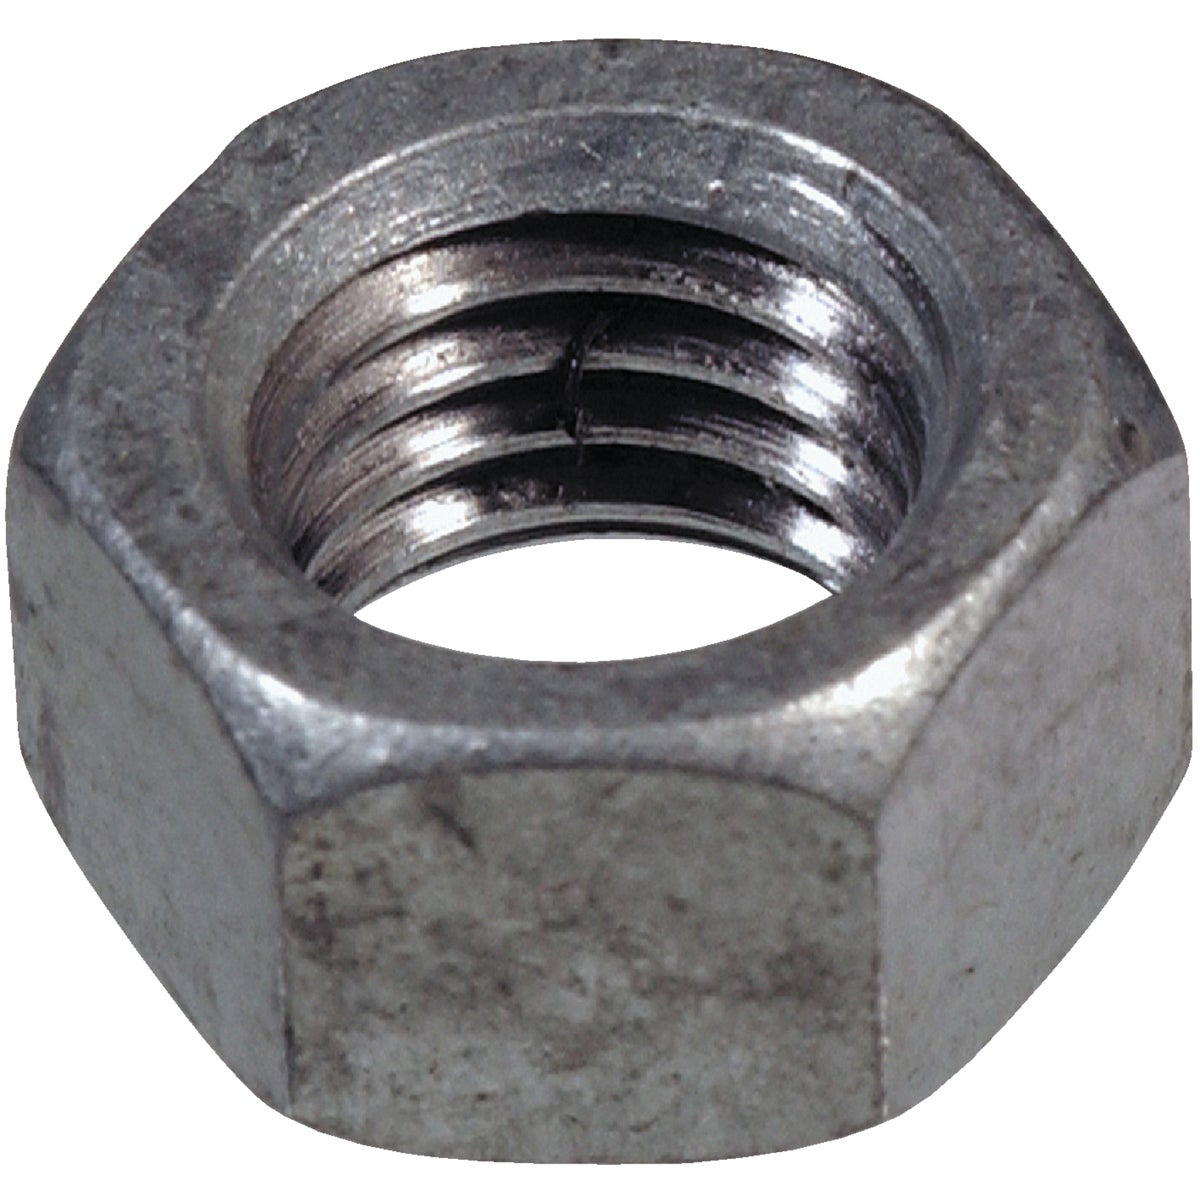 Hillman 5/16 In. 18 tpi Grade 2 Stainless Steel Hex Nuts (100 Ct.)